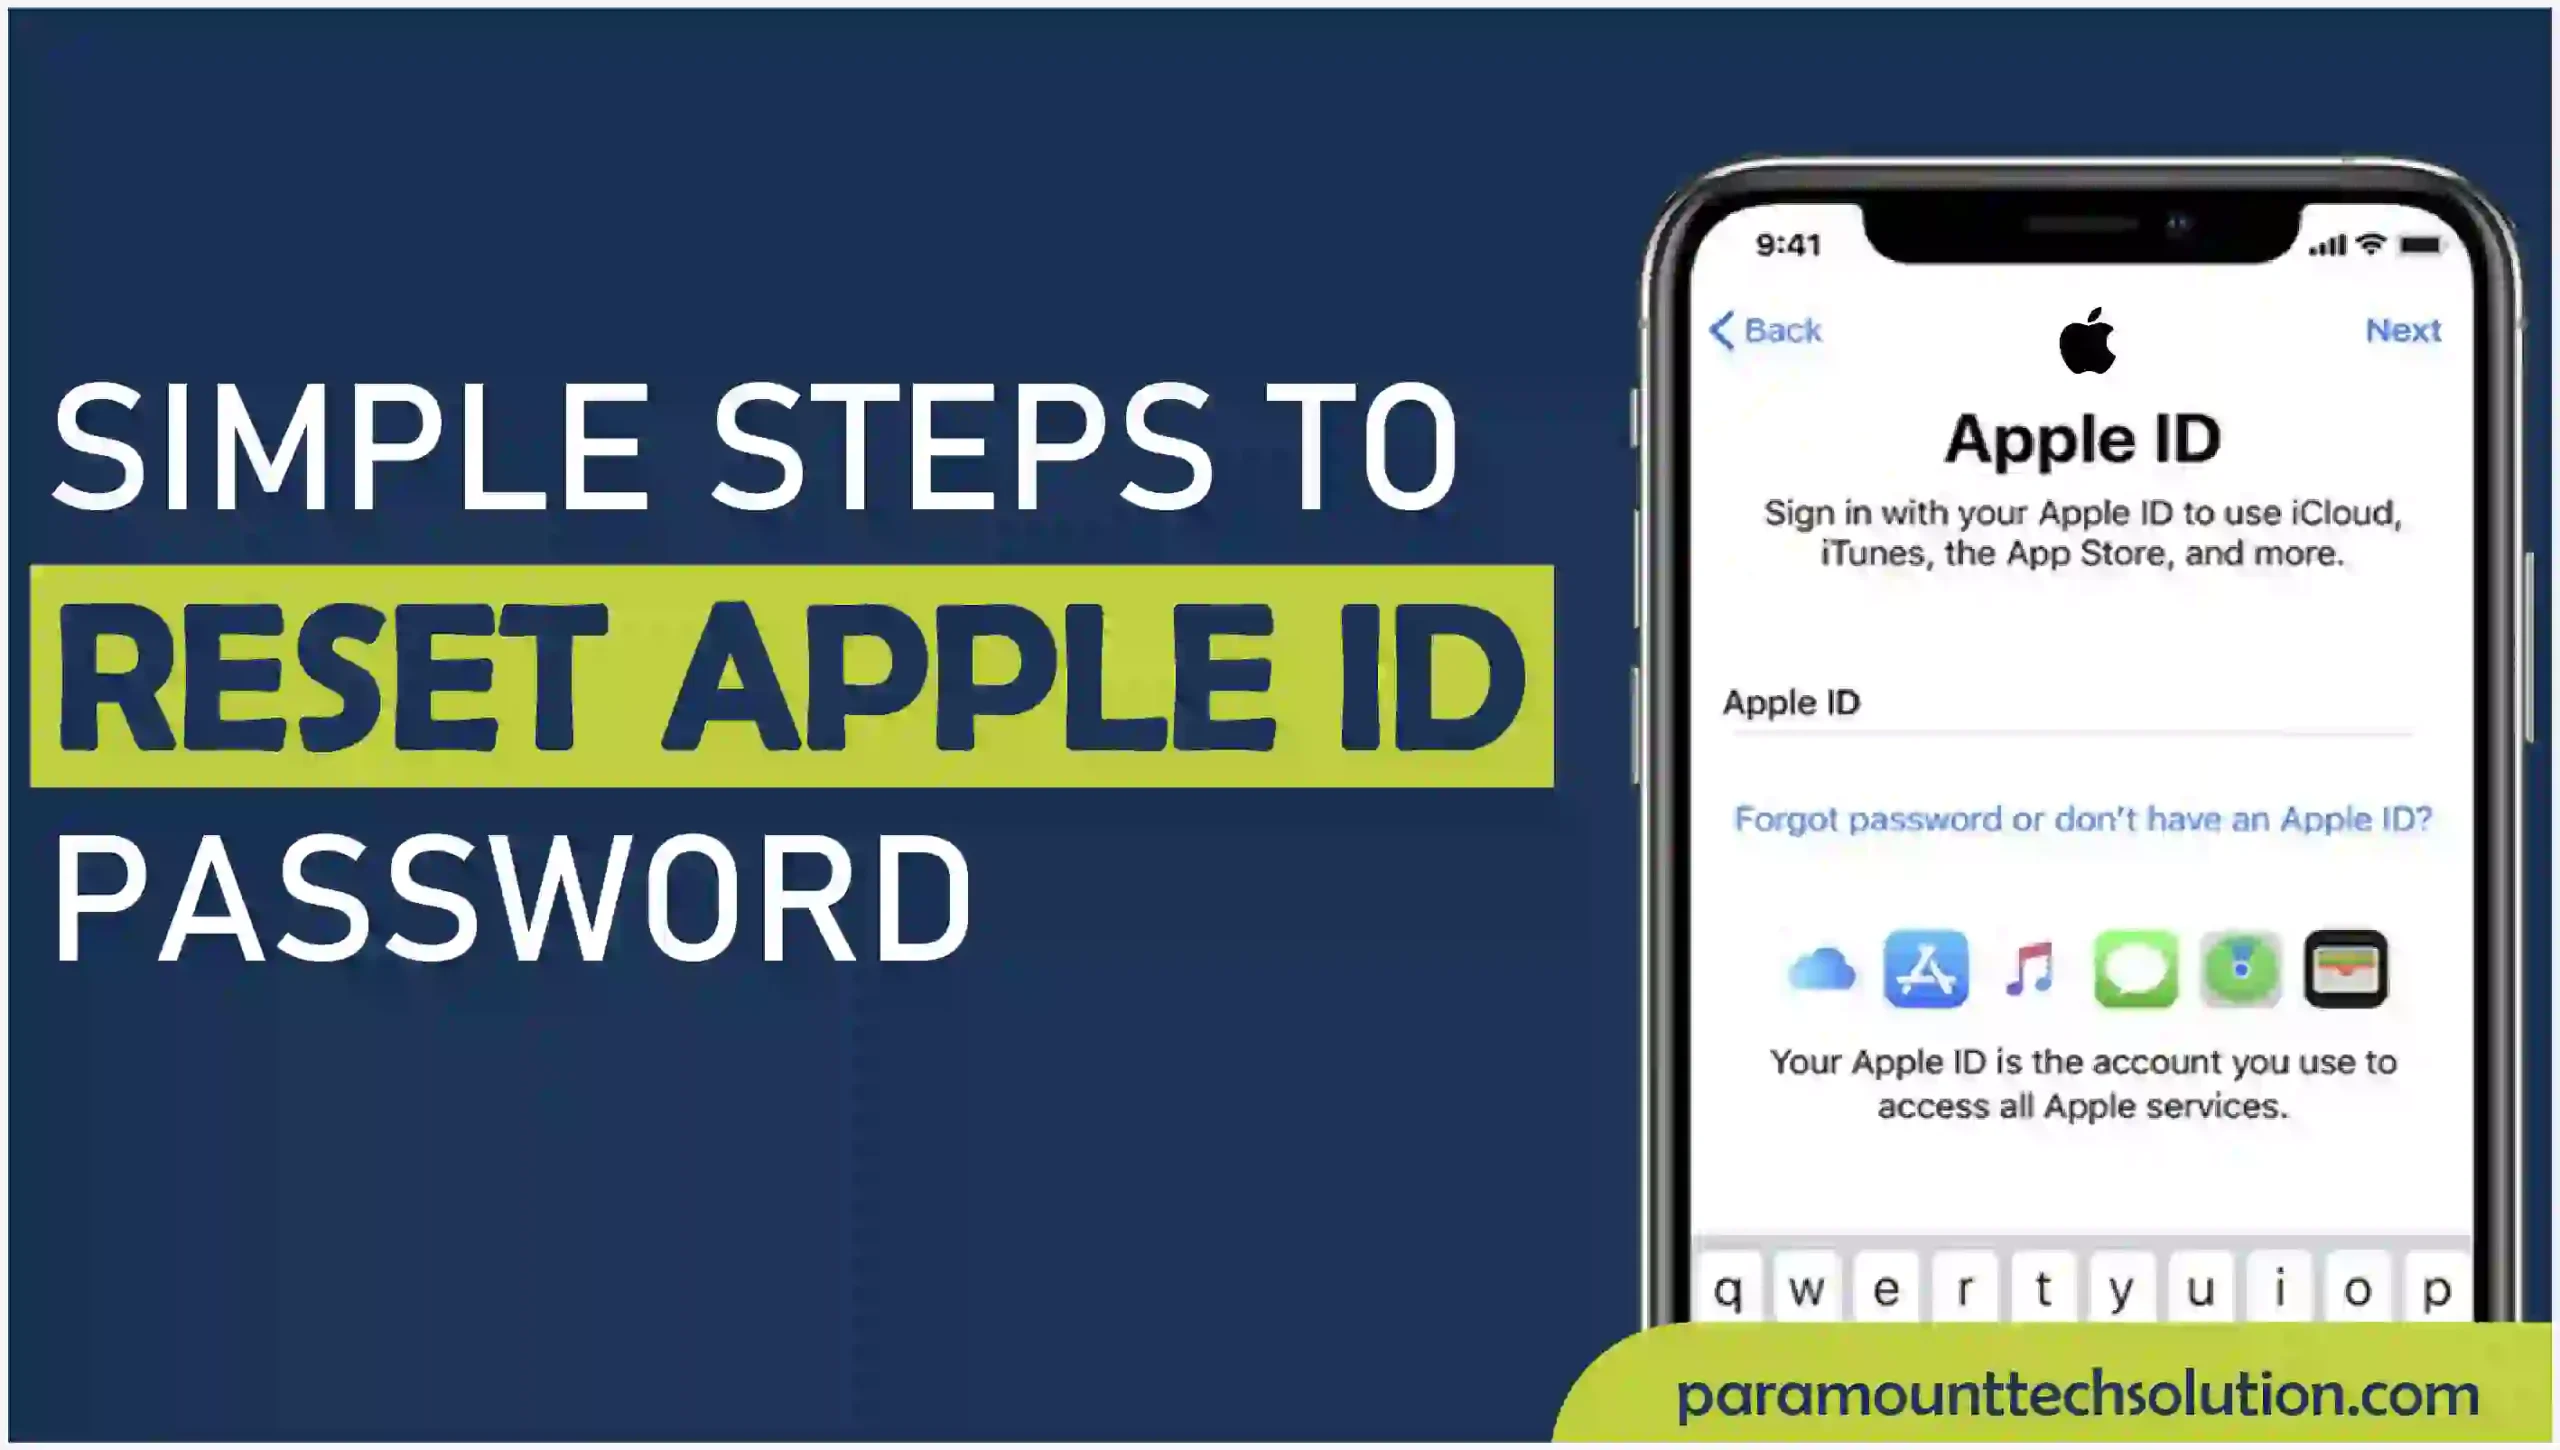 Apple ID Password reset using different steps for iphone and macbook